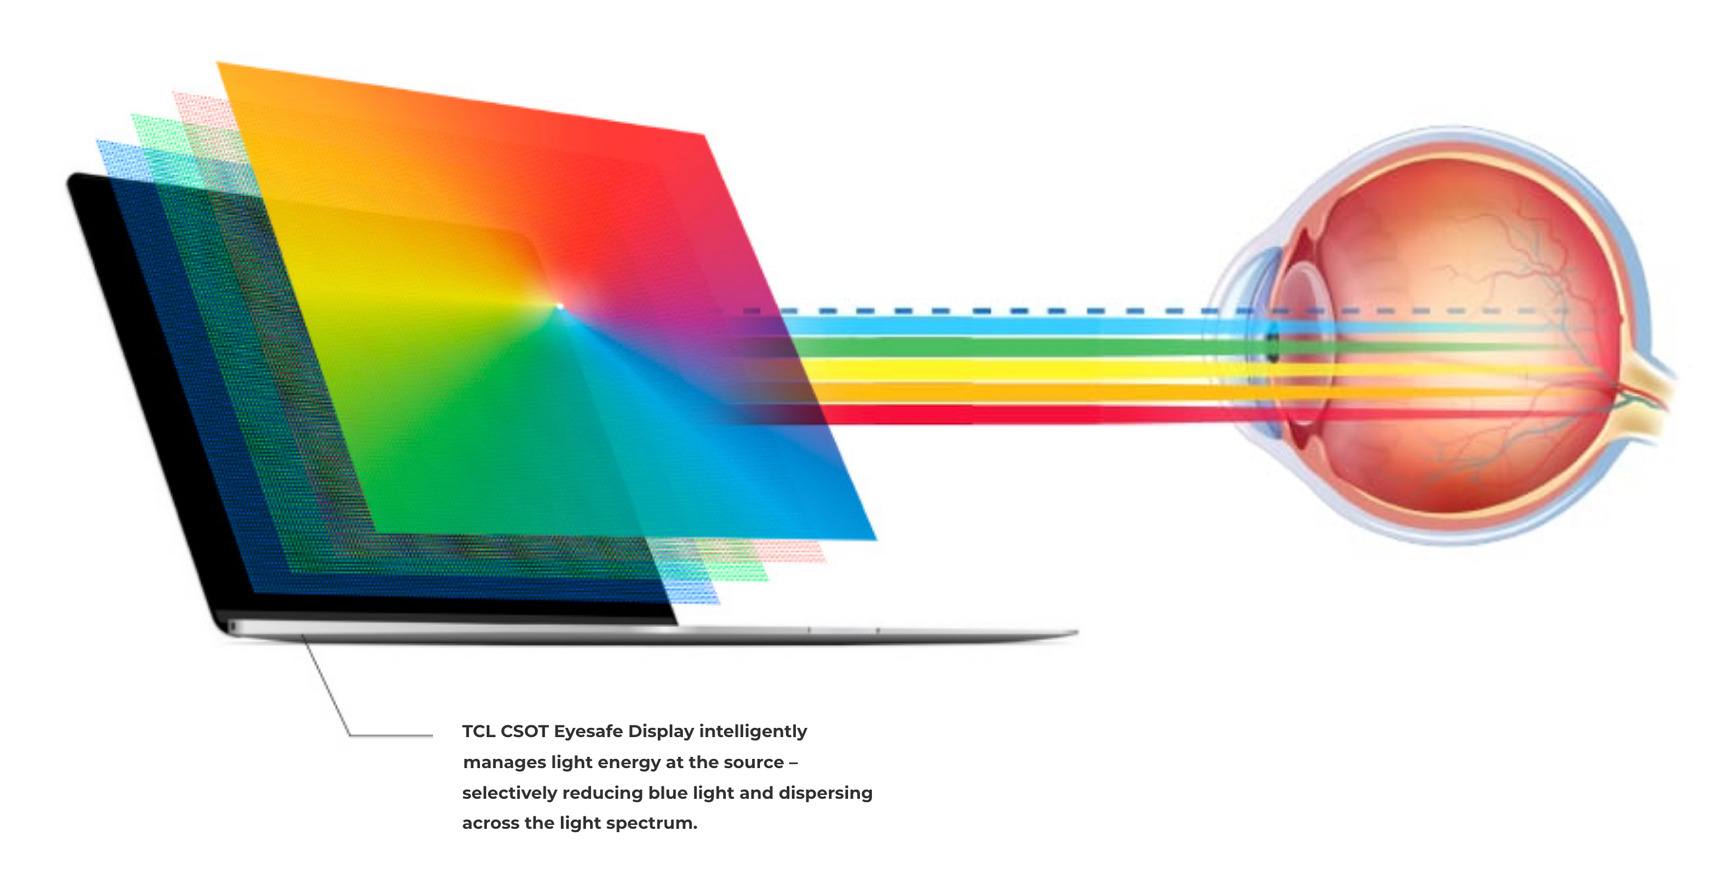 TCL Says its Displays Are Certified to Reduce Eye Strain, Guard Against Harsh Blue Light